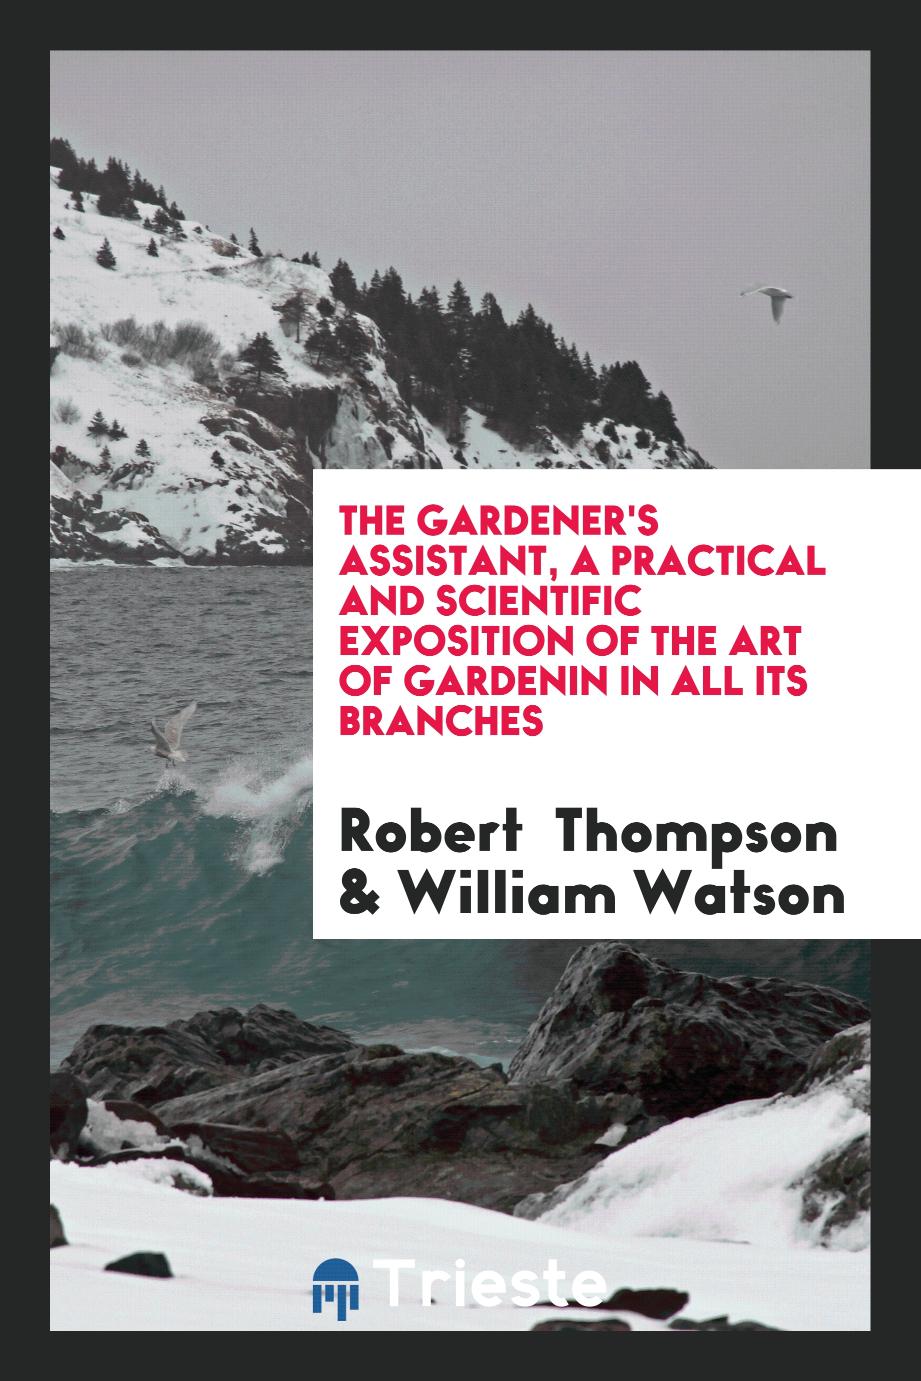 The Gardener's Assistant, a Practical and Scientific Exposition of the Art of Gardenin in All Its Branches